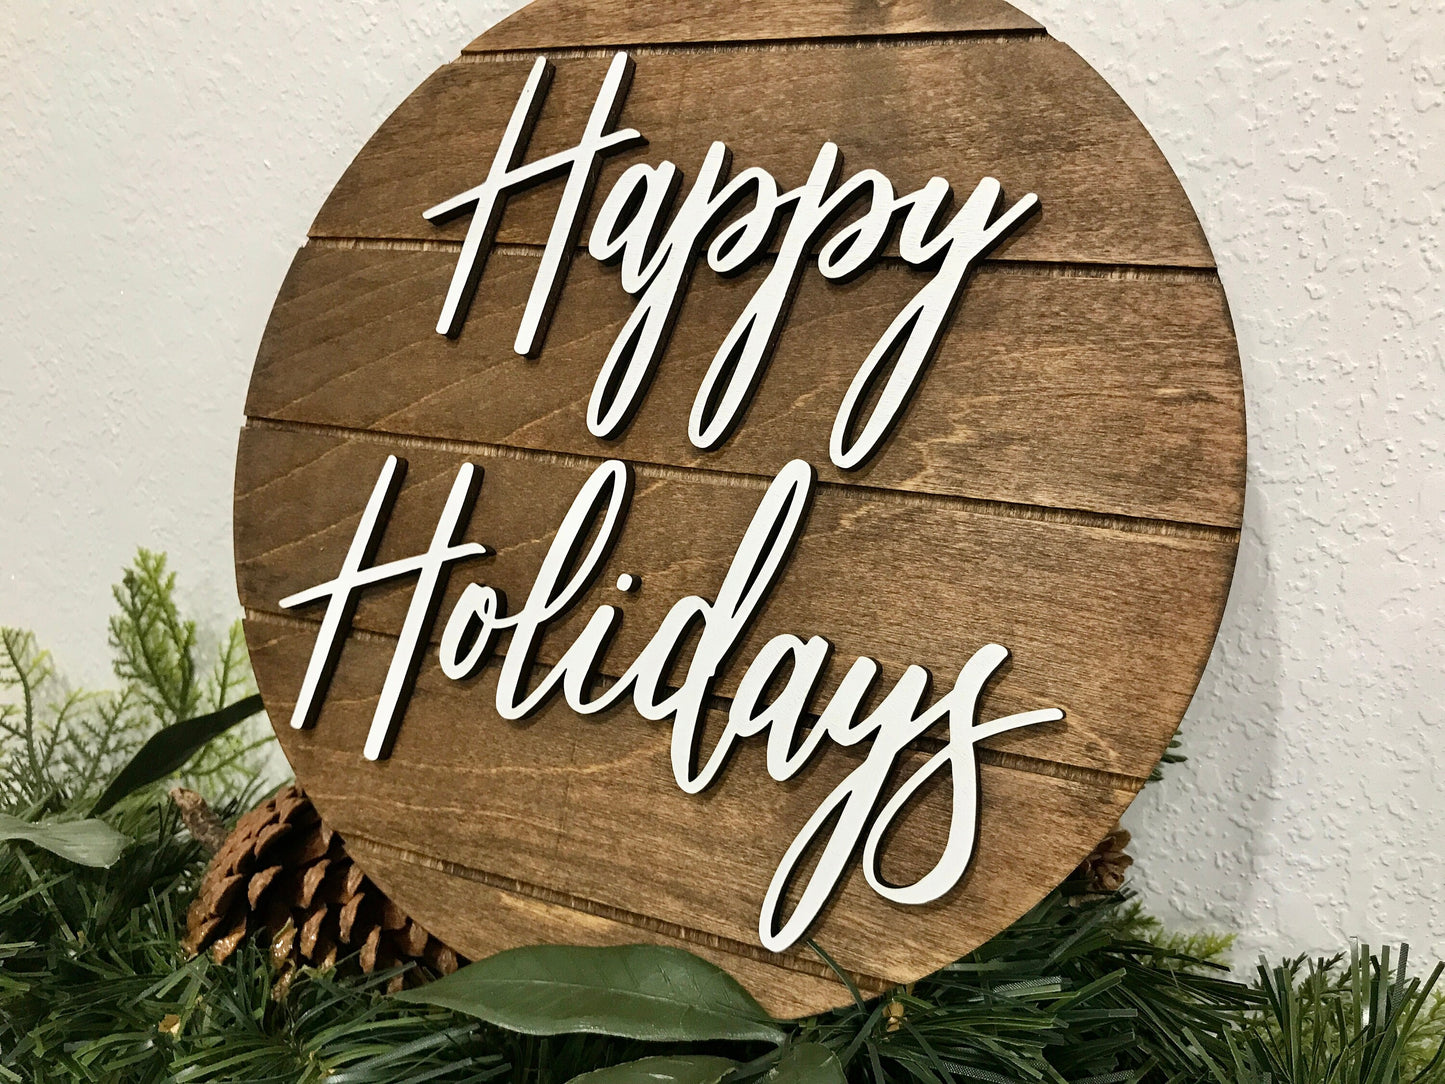 Merry Christmas sign, Christmas decorations, 3D holiday decor, shiplap wood signs, living room wooden sign wall hanging, rustic mantel decor